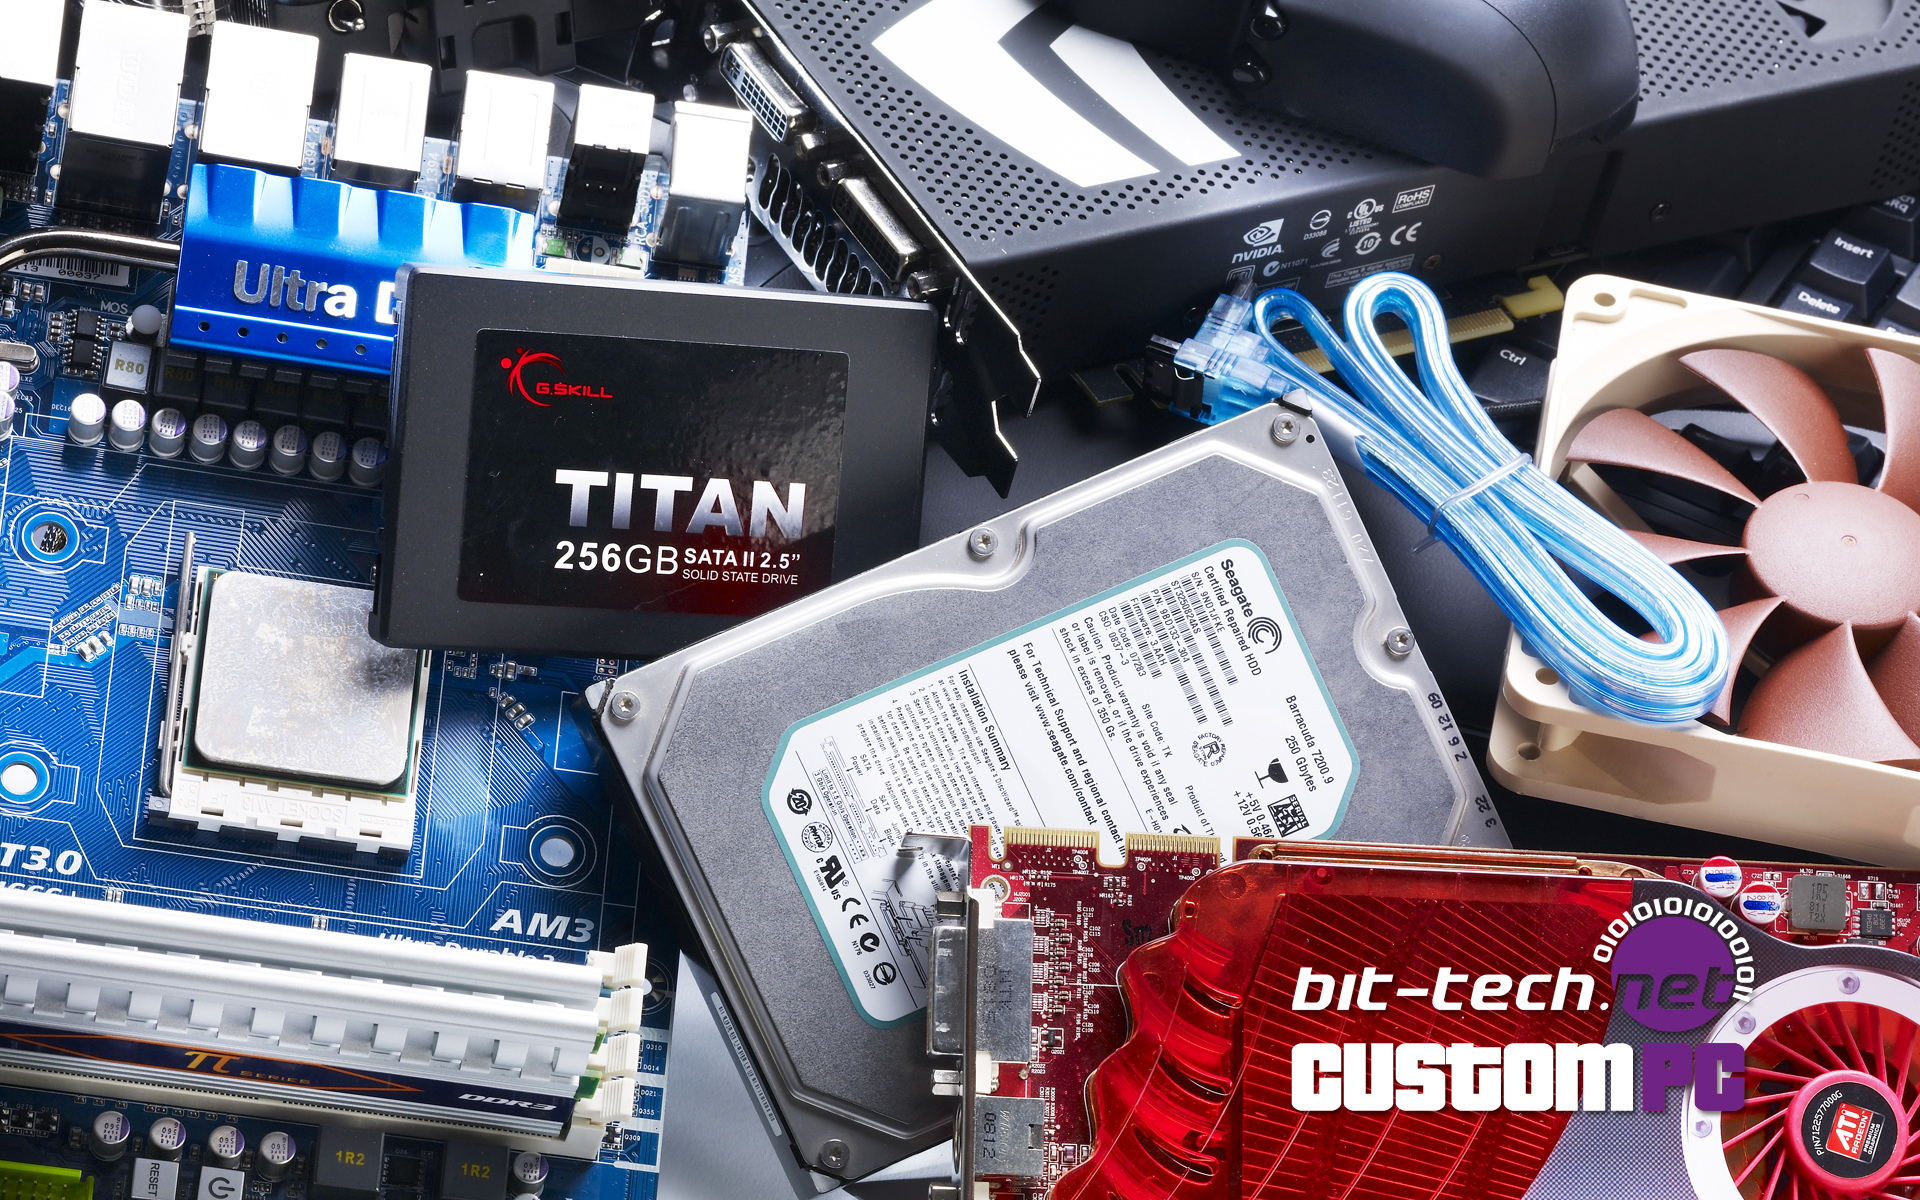 video card, hardware, keyboard, cooler, motherboard, cables, solid hard disk, pc, hard drive